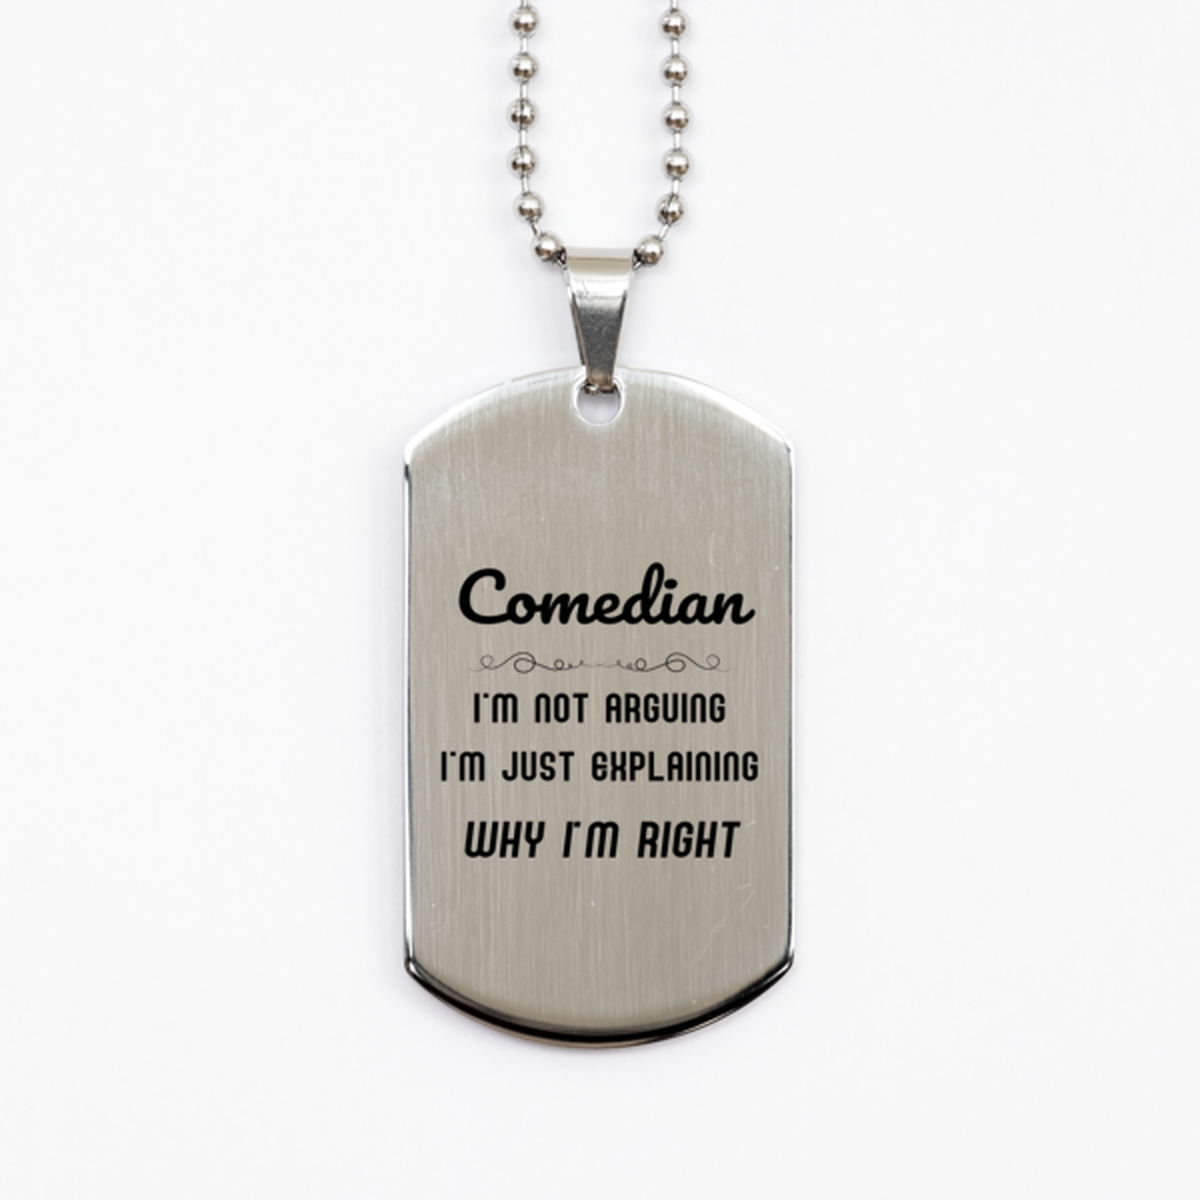 Comedian I'm not Arguing. I'm Just Explaining Why I'm RIGHT Silver Dog Tag, Funny Saying Quote Comedian Gifts For Comedian Graduation Birthday Christmas Gifts for Men Women Coworker